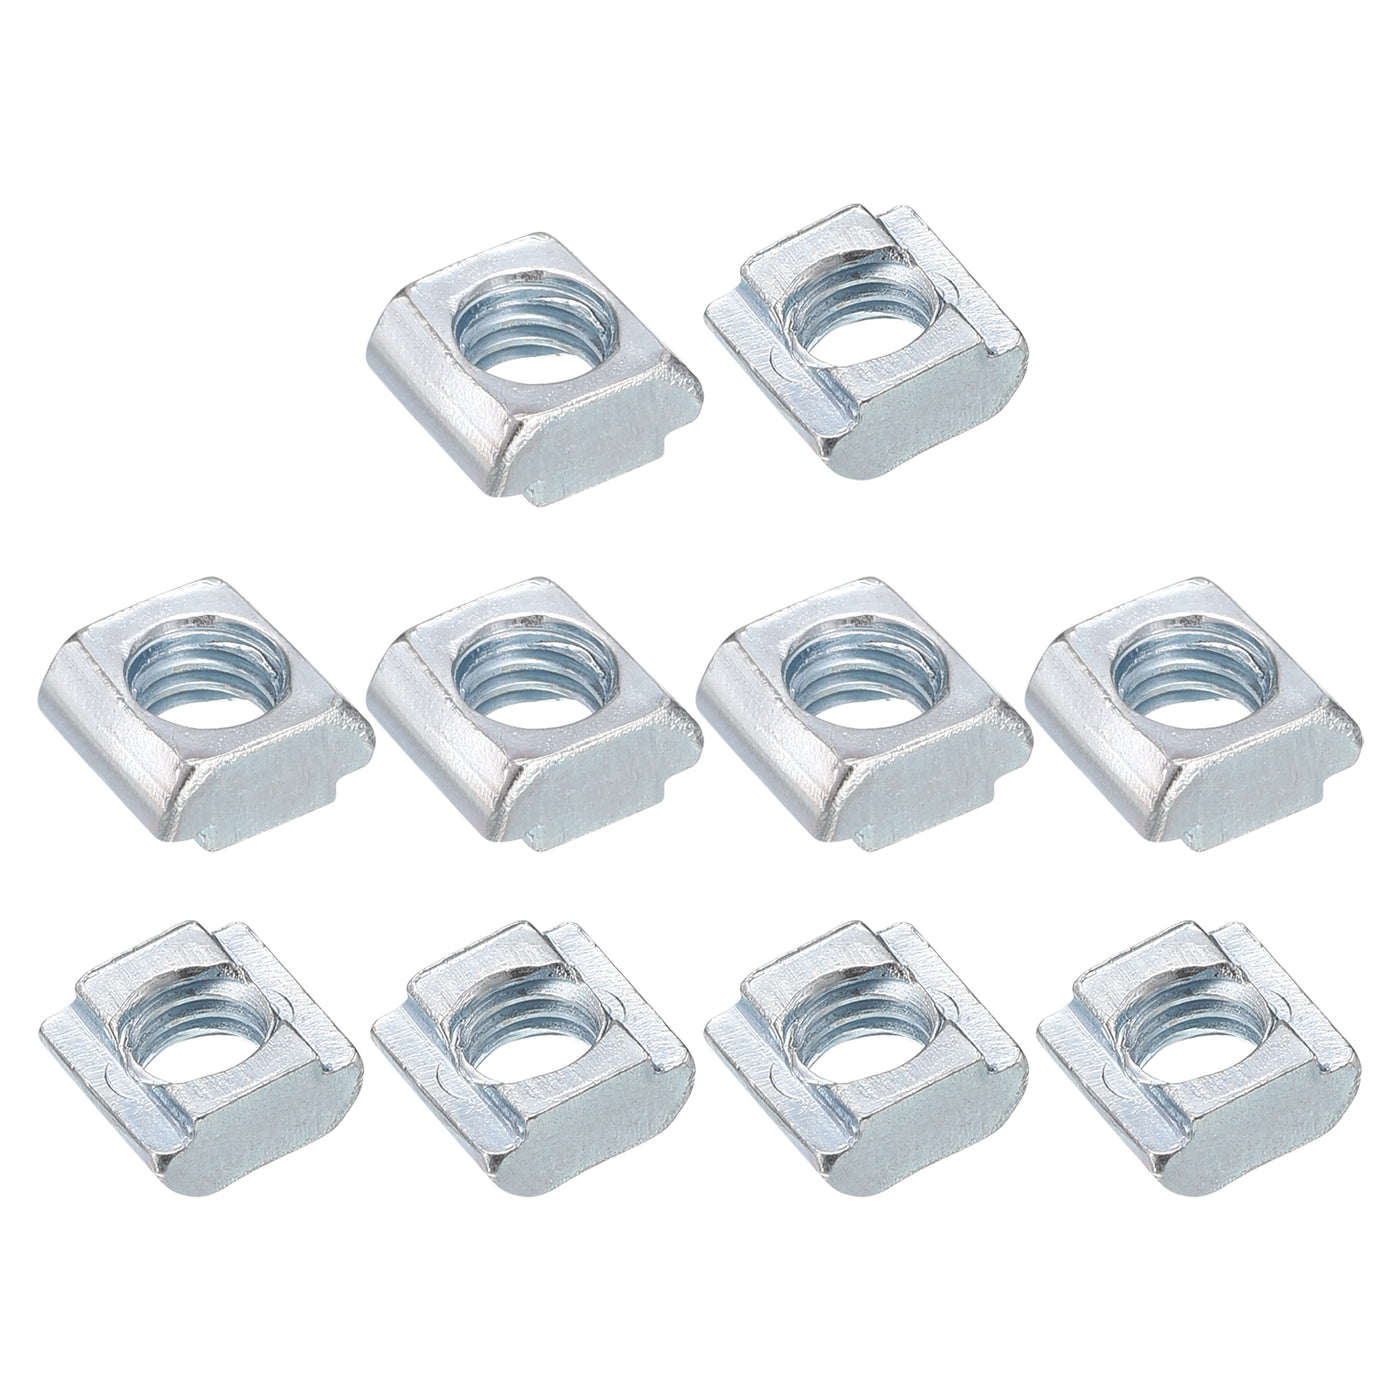 uxcell Uxcell T Nuts, 100pcs - Nickel Plated Carbon Steel T Slot Bolts, 2020 Series M6 Hammer Head Fastener, Sliding T Nuts for Aluminum Extrusion Profile (Silver)